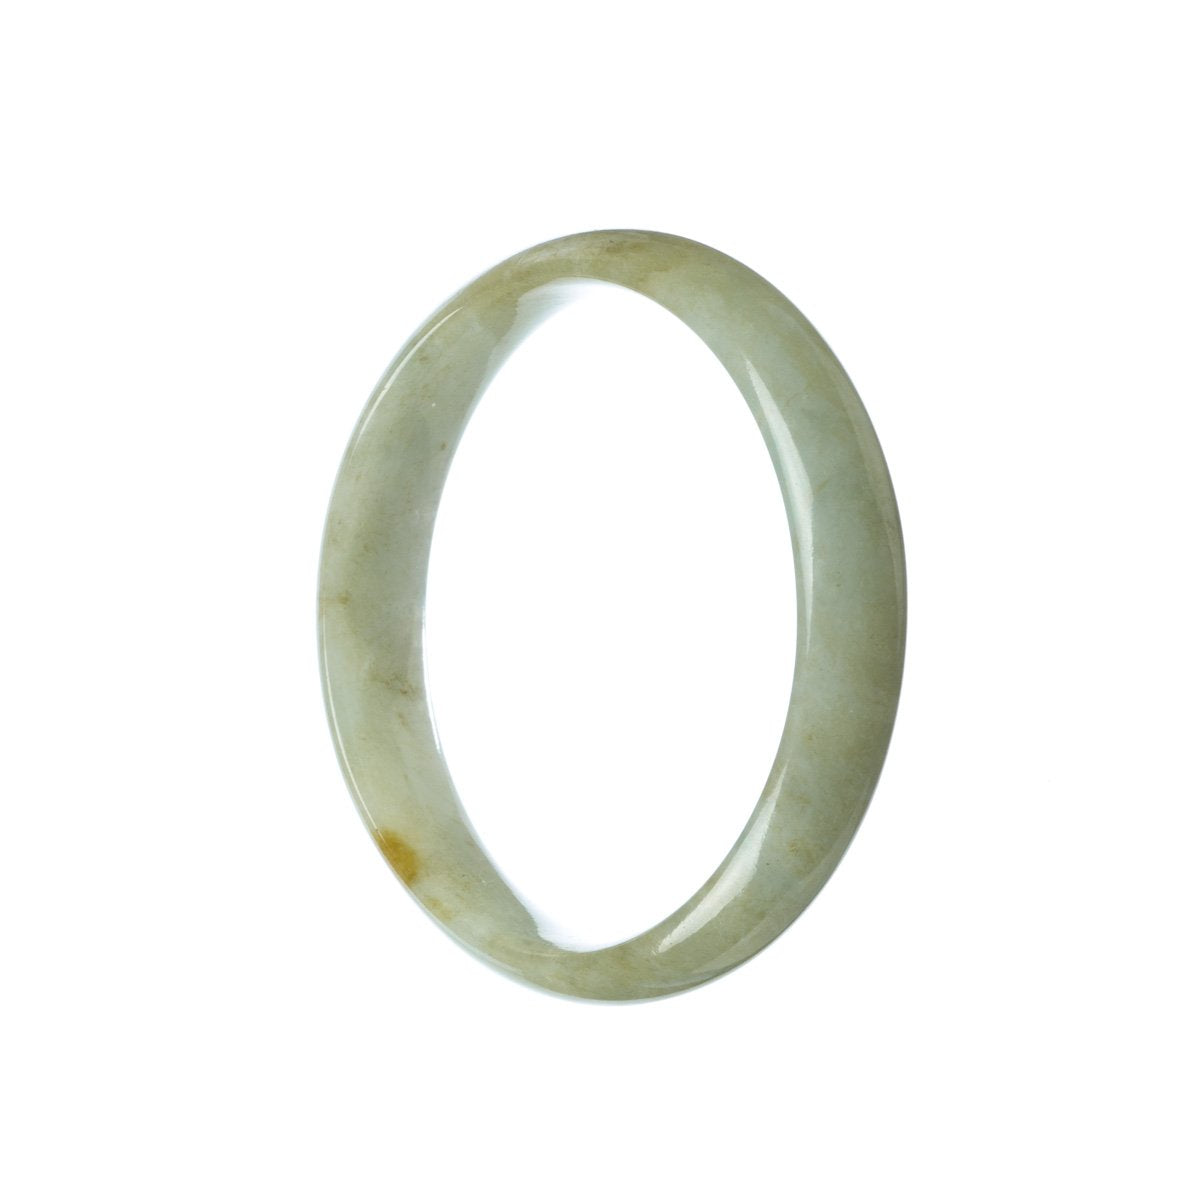 A delicate pale green jadeite bracelet with a half-moon design, measuring 57mm. Exquisite and natural, this genuine untreated jadeite piece from MAYS GEMS is a timeless beauty.